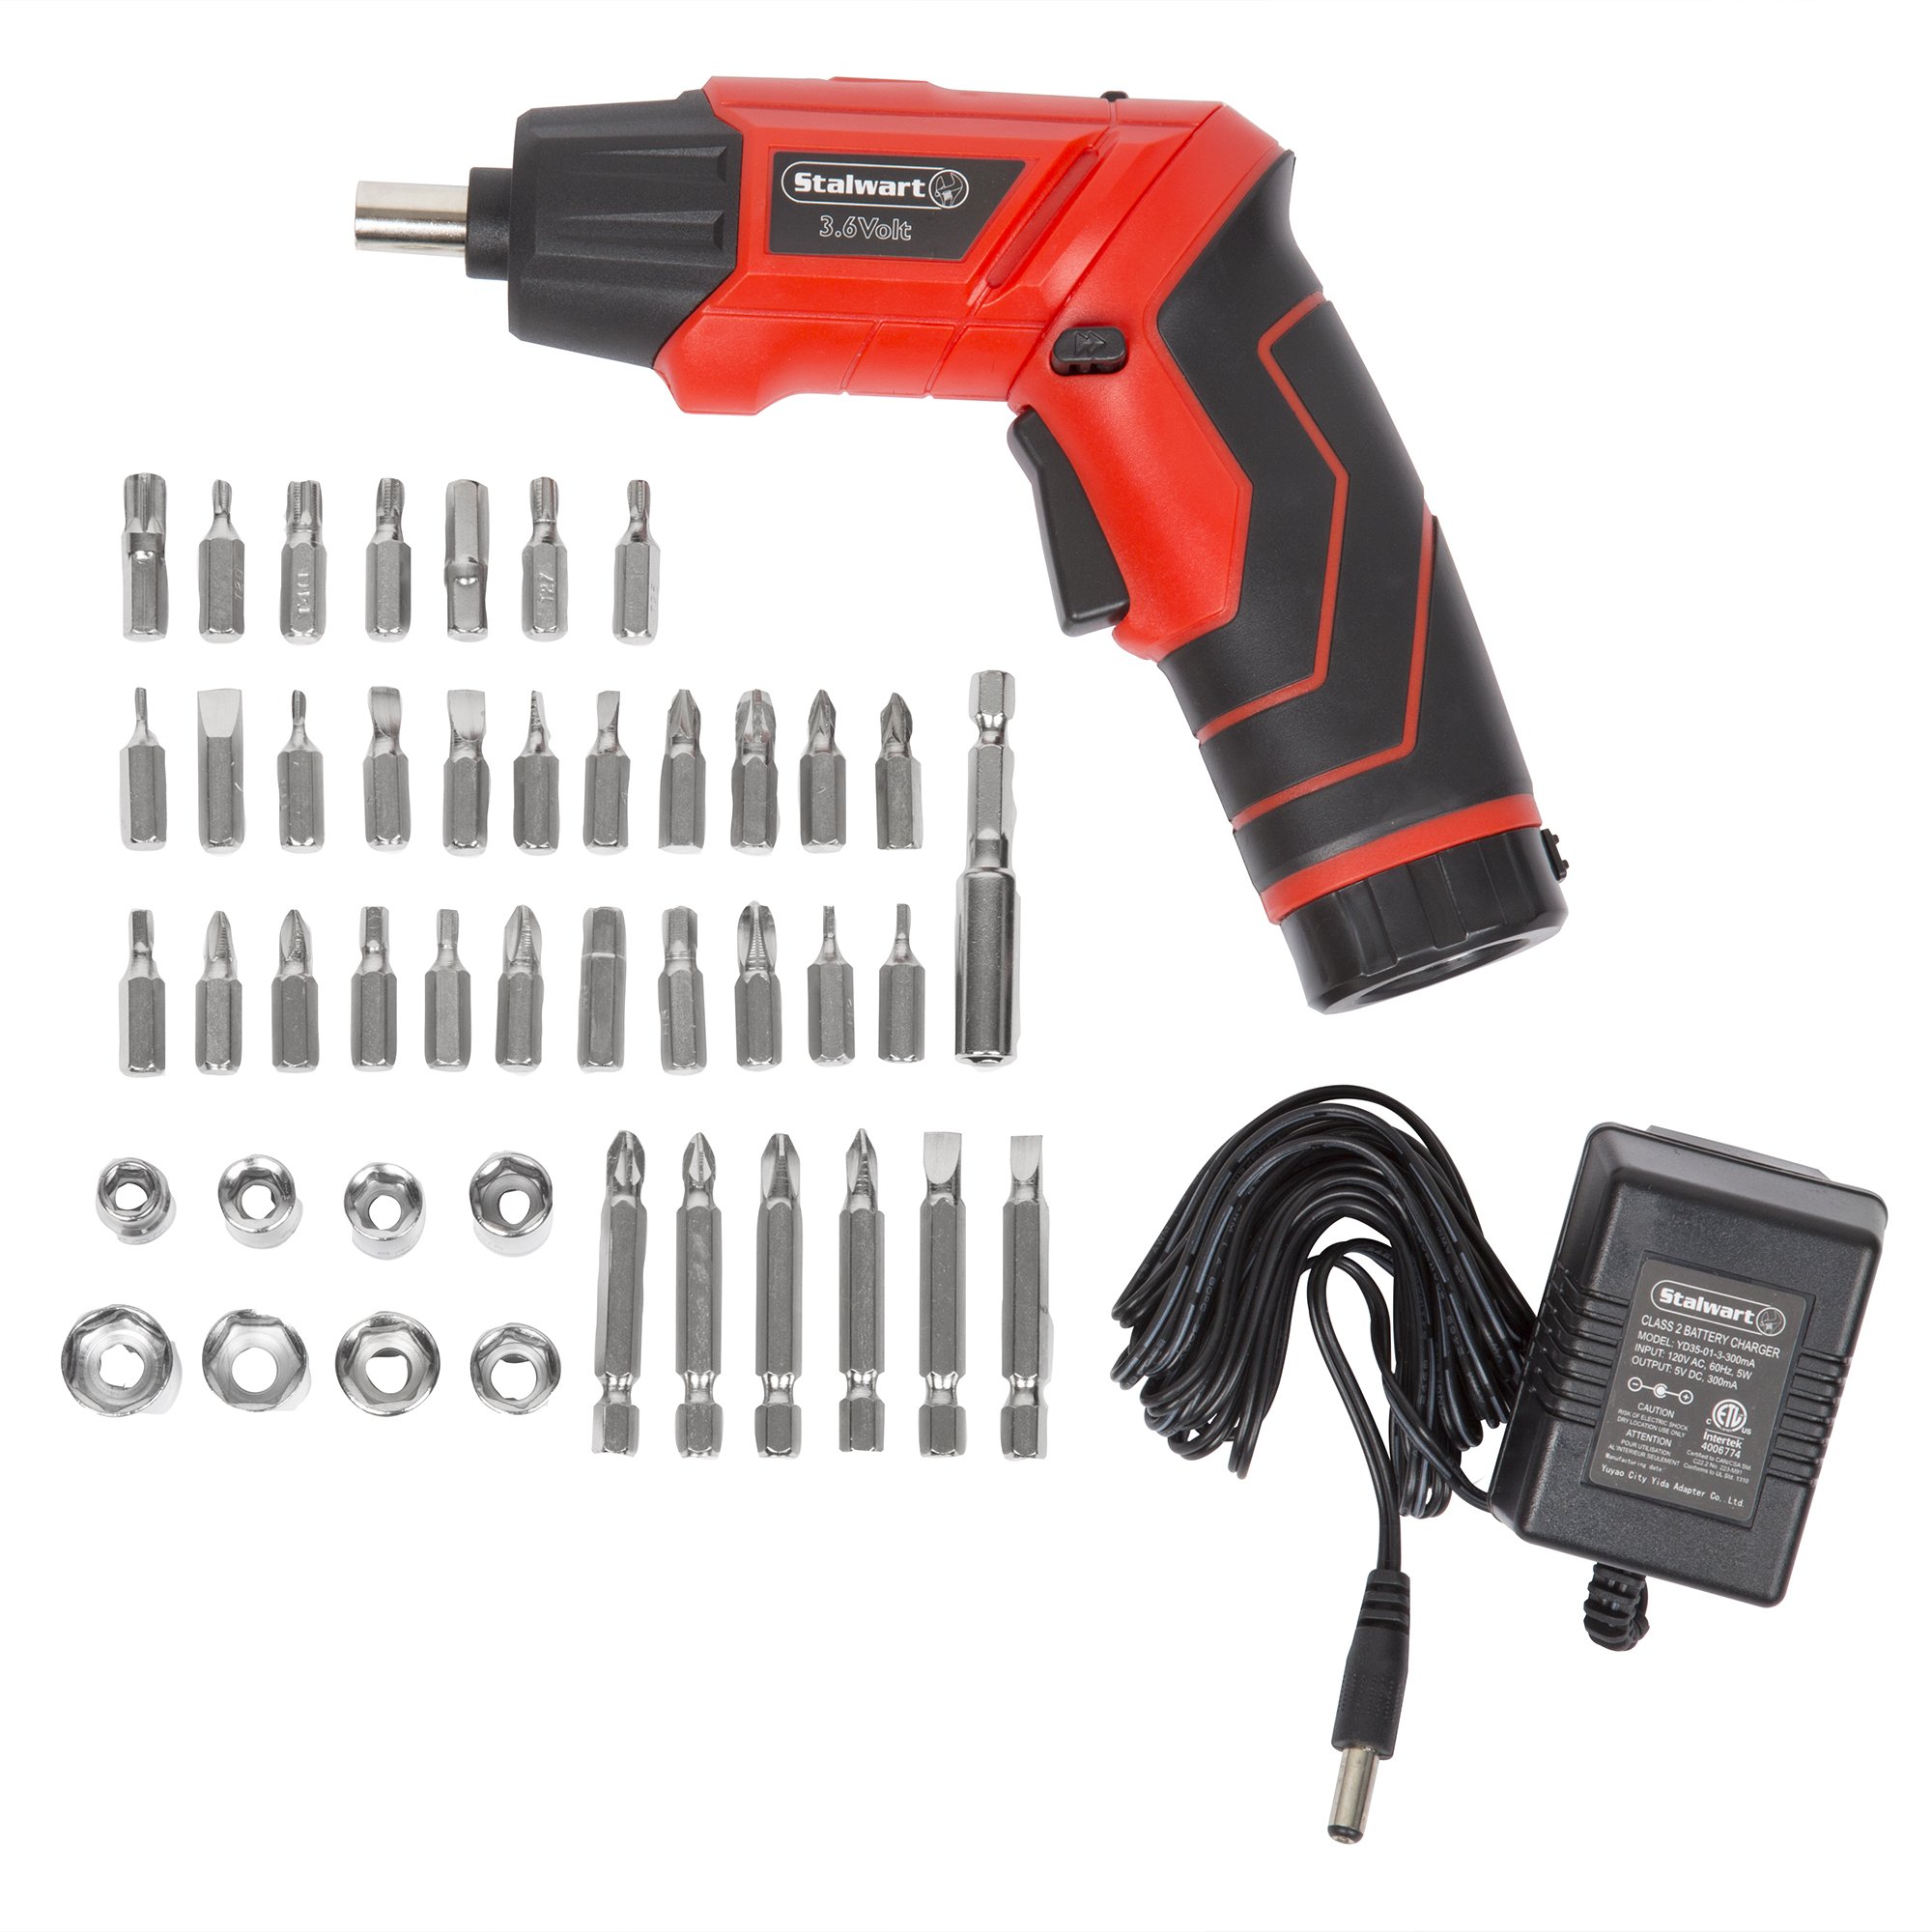 Stalwart - 75-PT1000 Pivoting Screwdriver 45 Pc. Set-Pivoting Cordless Power Tool with Rechargeable 3.6V Battery, LED Lights, Bits, Sockets, and Case by Black